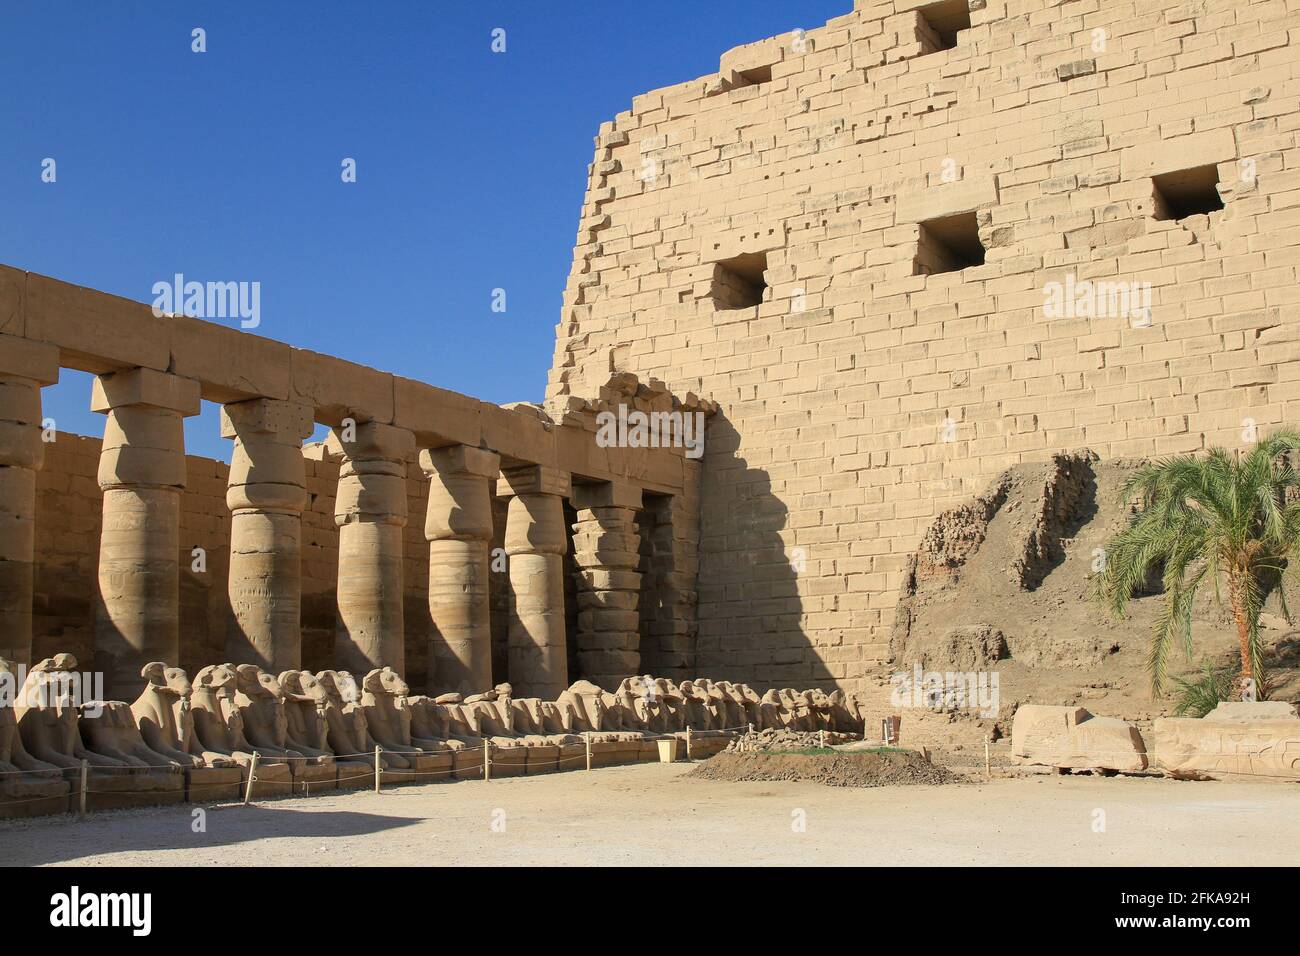 Ruins of columns and statues at Temples of Karnak, Luxor, Egypt Stock Photo